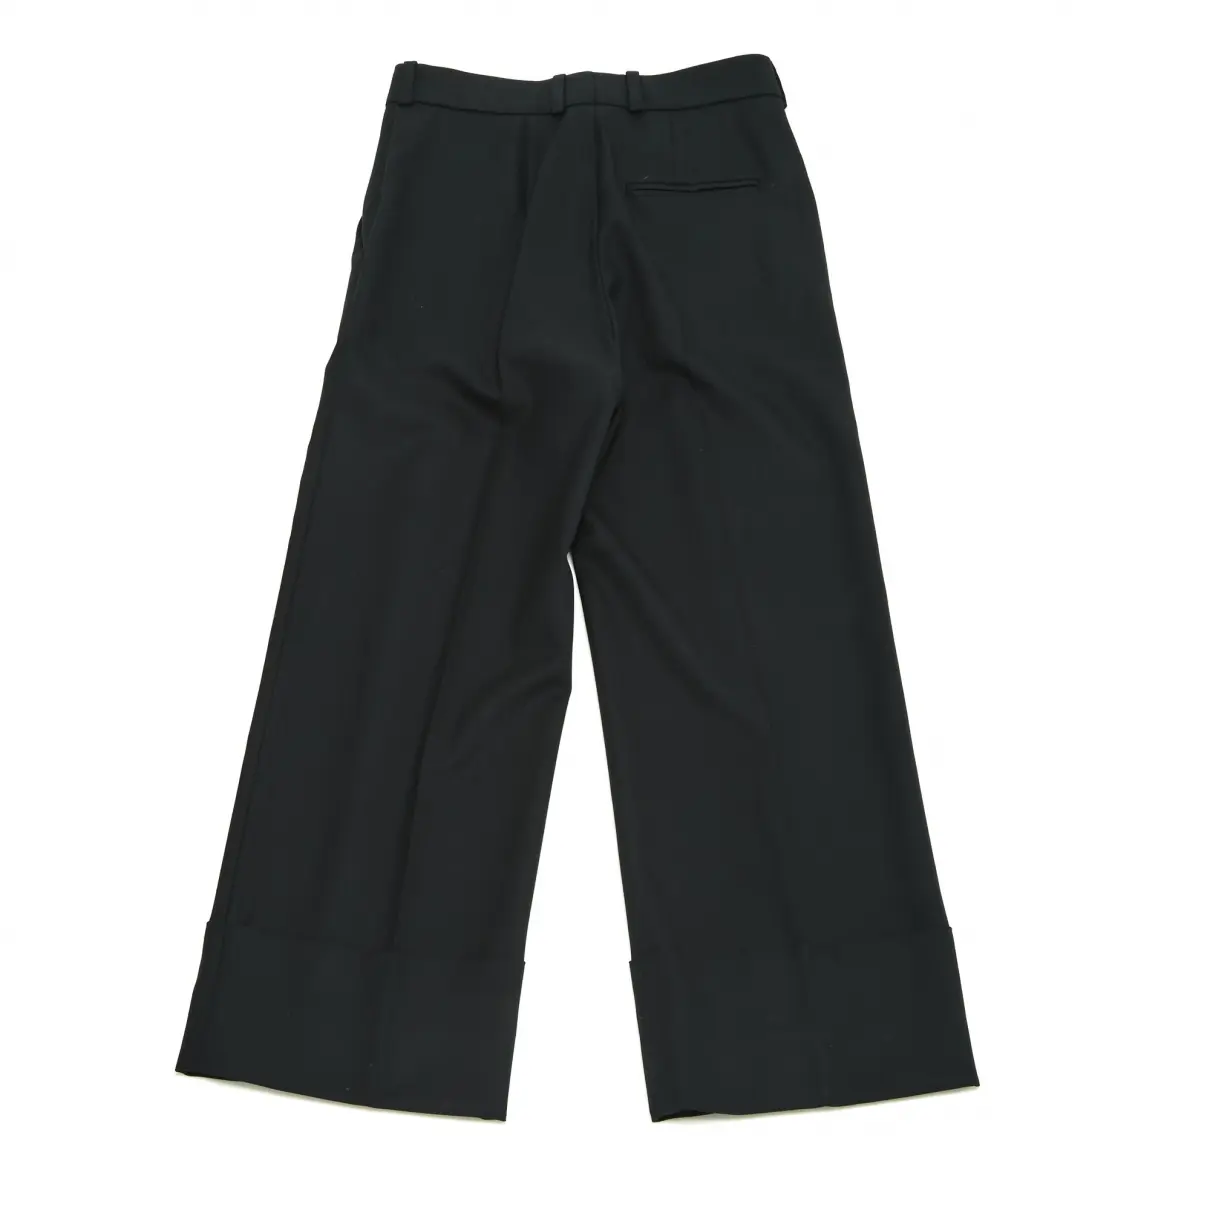 Racil Wool large pants for sale